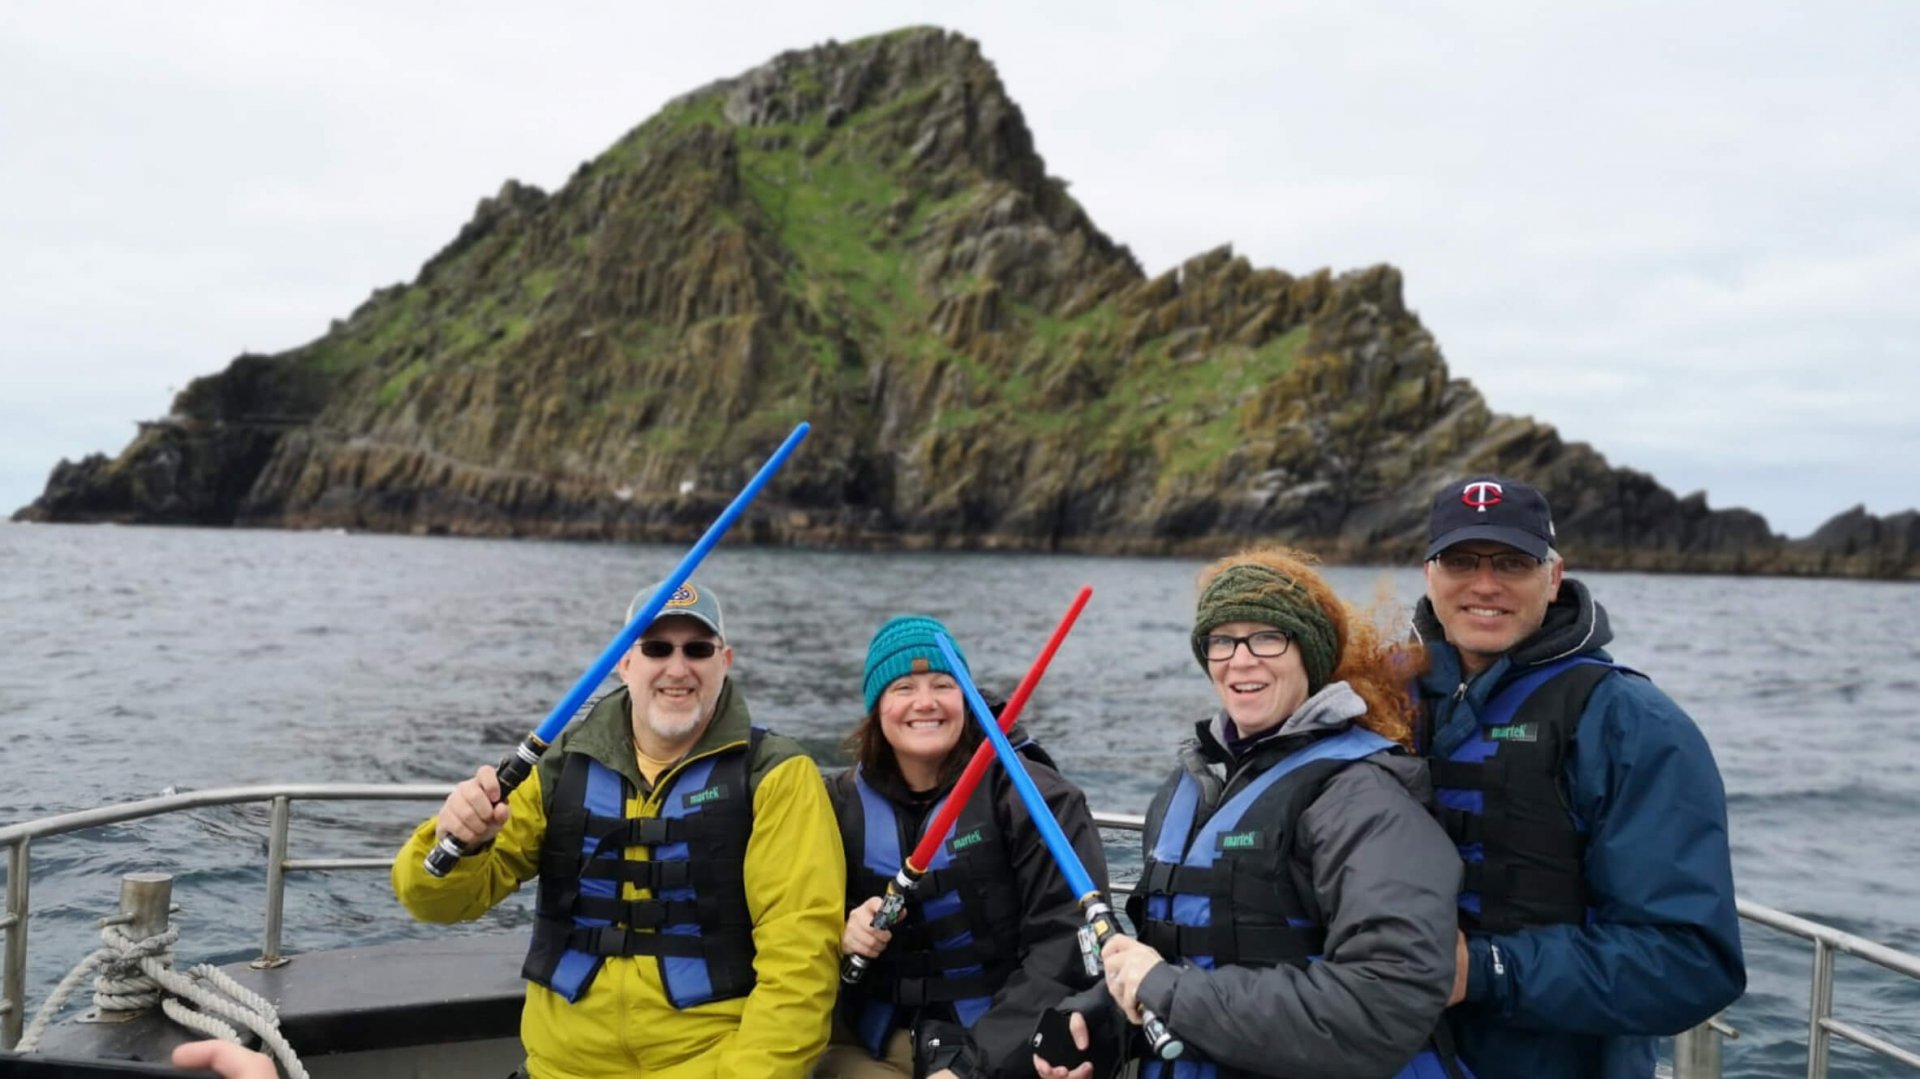 Vagabond tour guests celebrating May The 4th Star Wars festival off Little Skellig island in Ireland with lightsabers